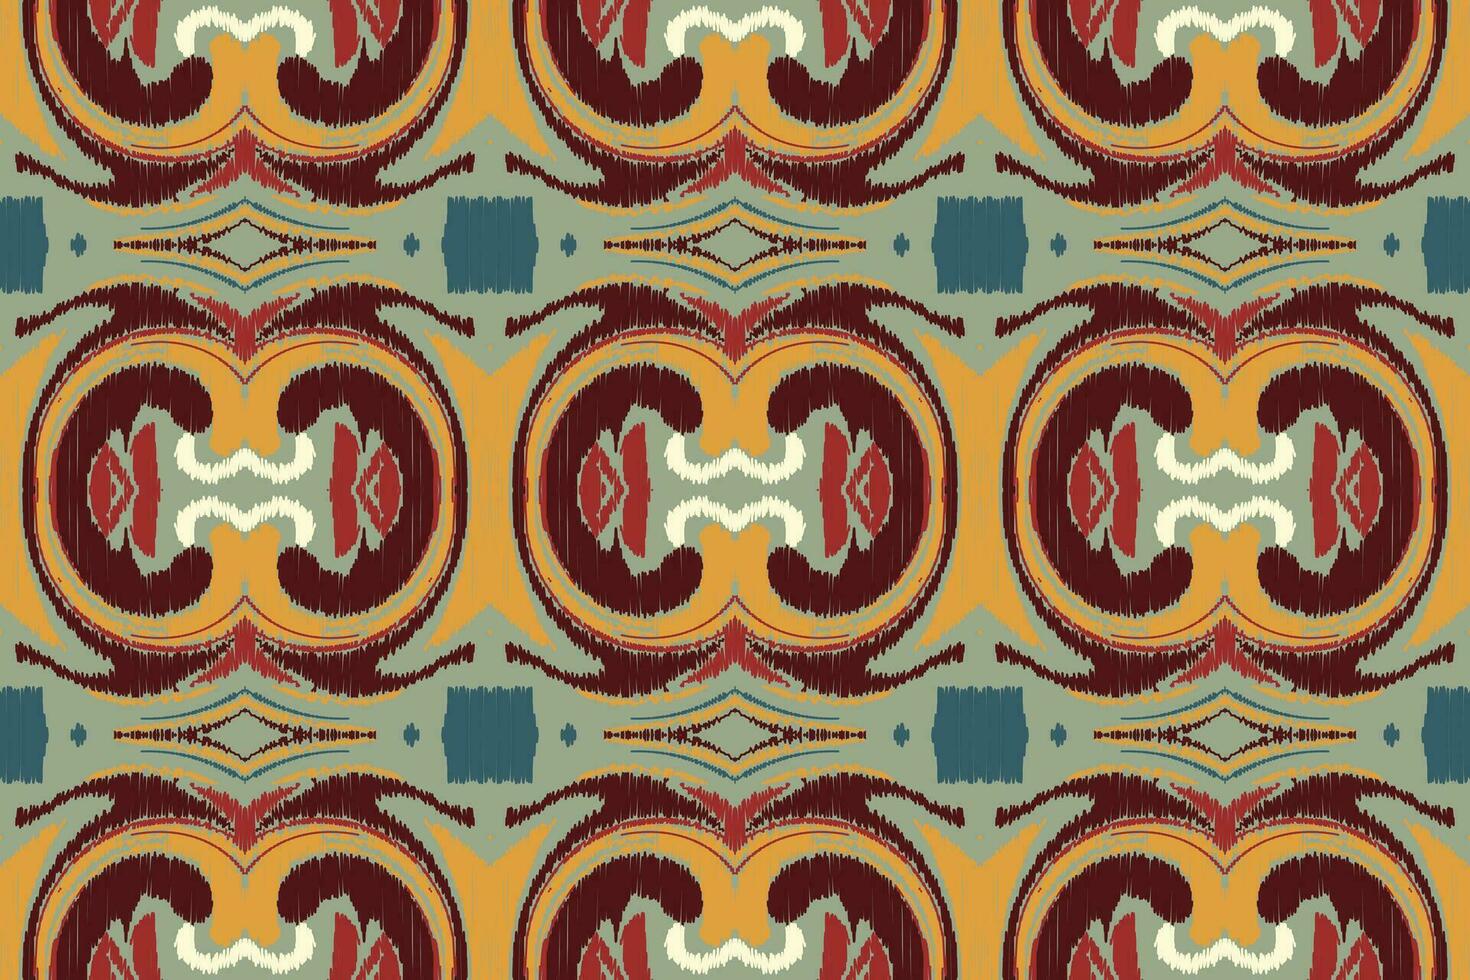 Ikat Floral Paisley Embroidery Background. Ikat Floral Geometric Ethnic Oriental Pattern Traditional. Ikat Aztec Style Abstract Design for Print Texture,fabric,saree,sari,carpet. vector